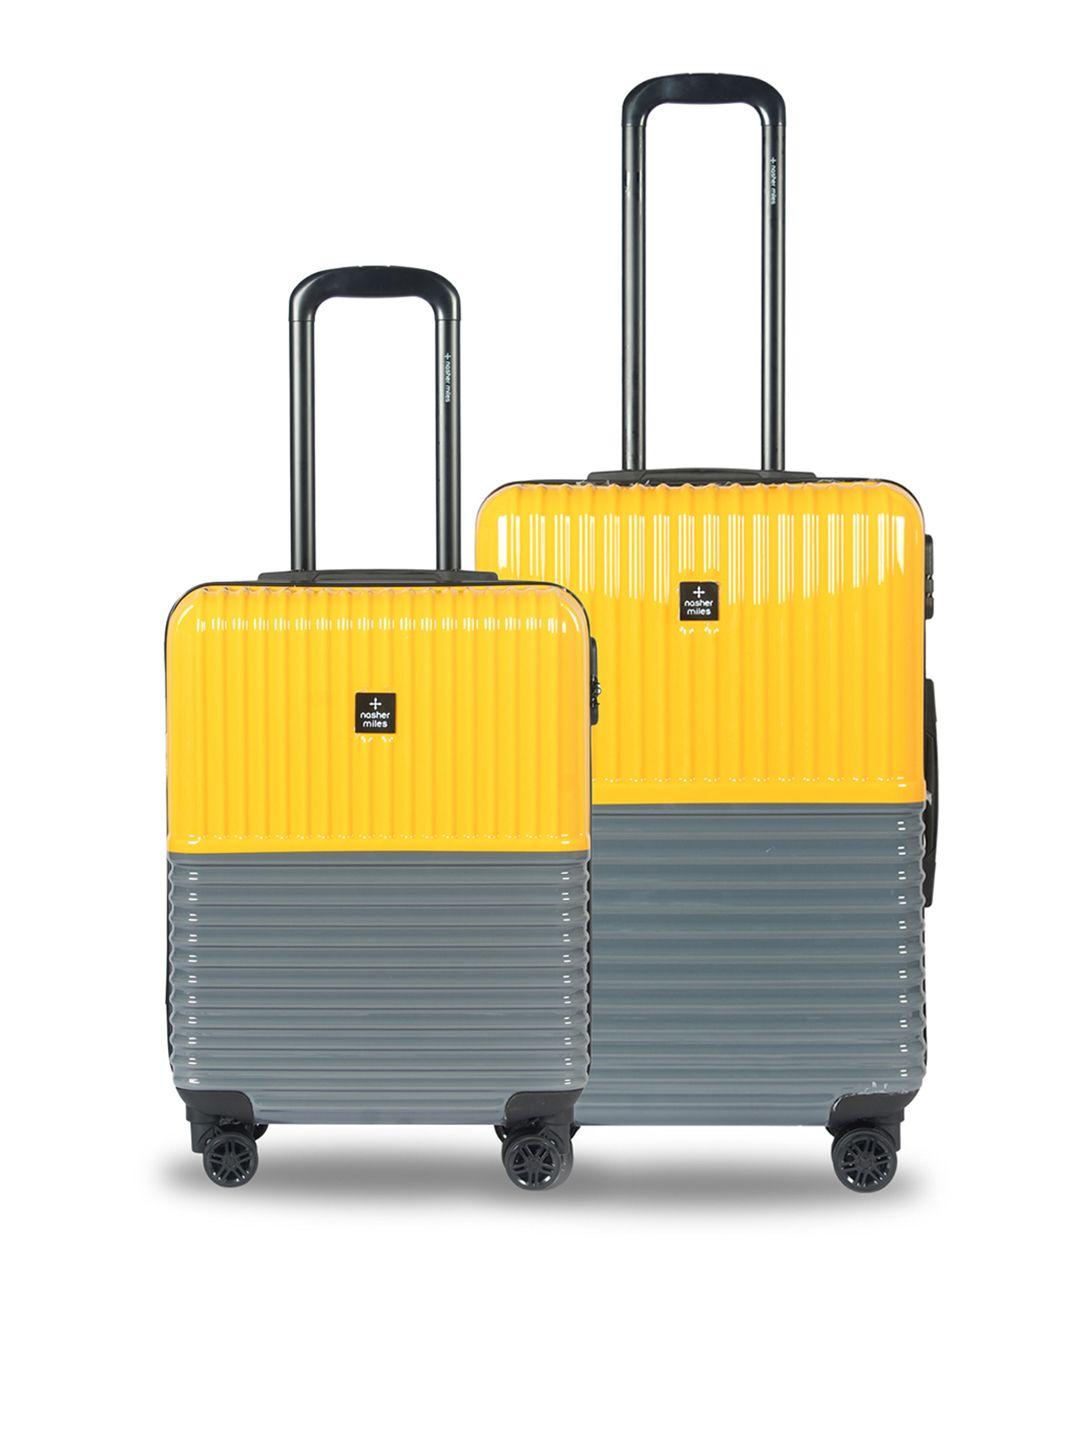 nasher miles set of 2 istanbul textured hard-sided trolley bags- 55 cm & 65 cm